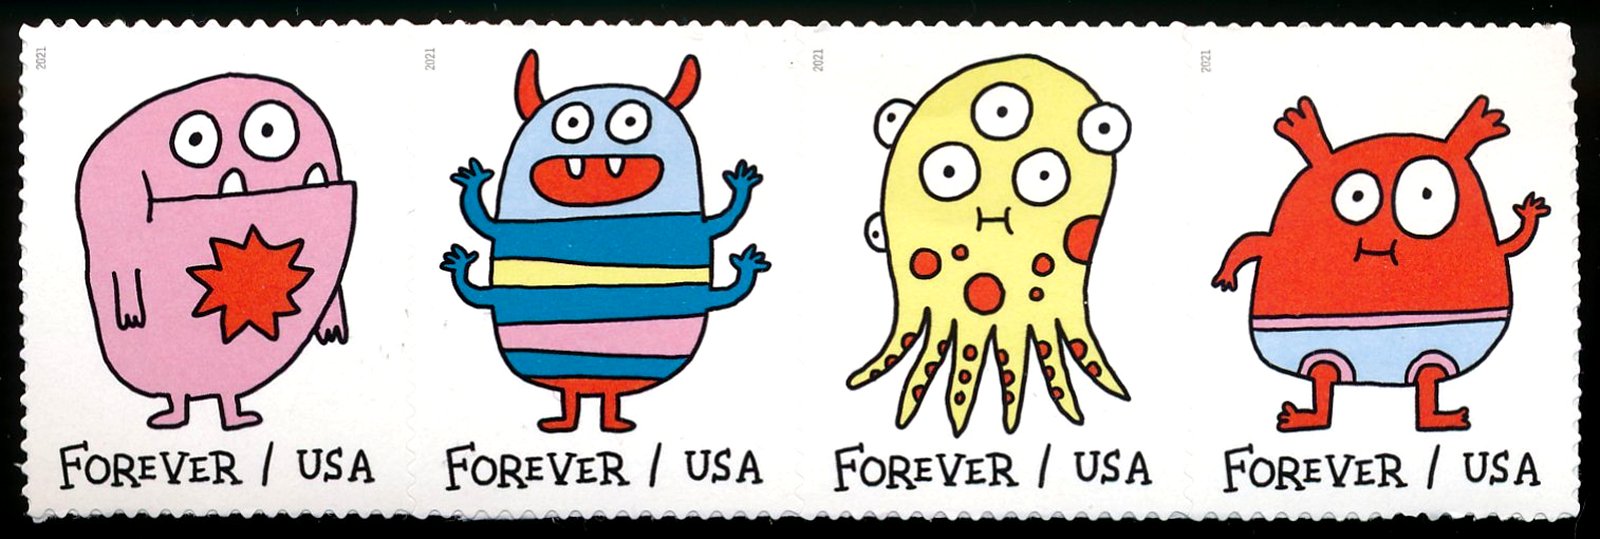 5636-5639hstrip Forever Message Monsters Mint Horz. Strip of 4 #5636-5639hstrip